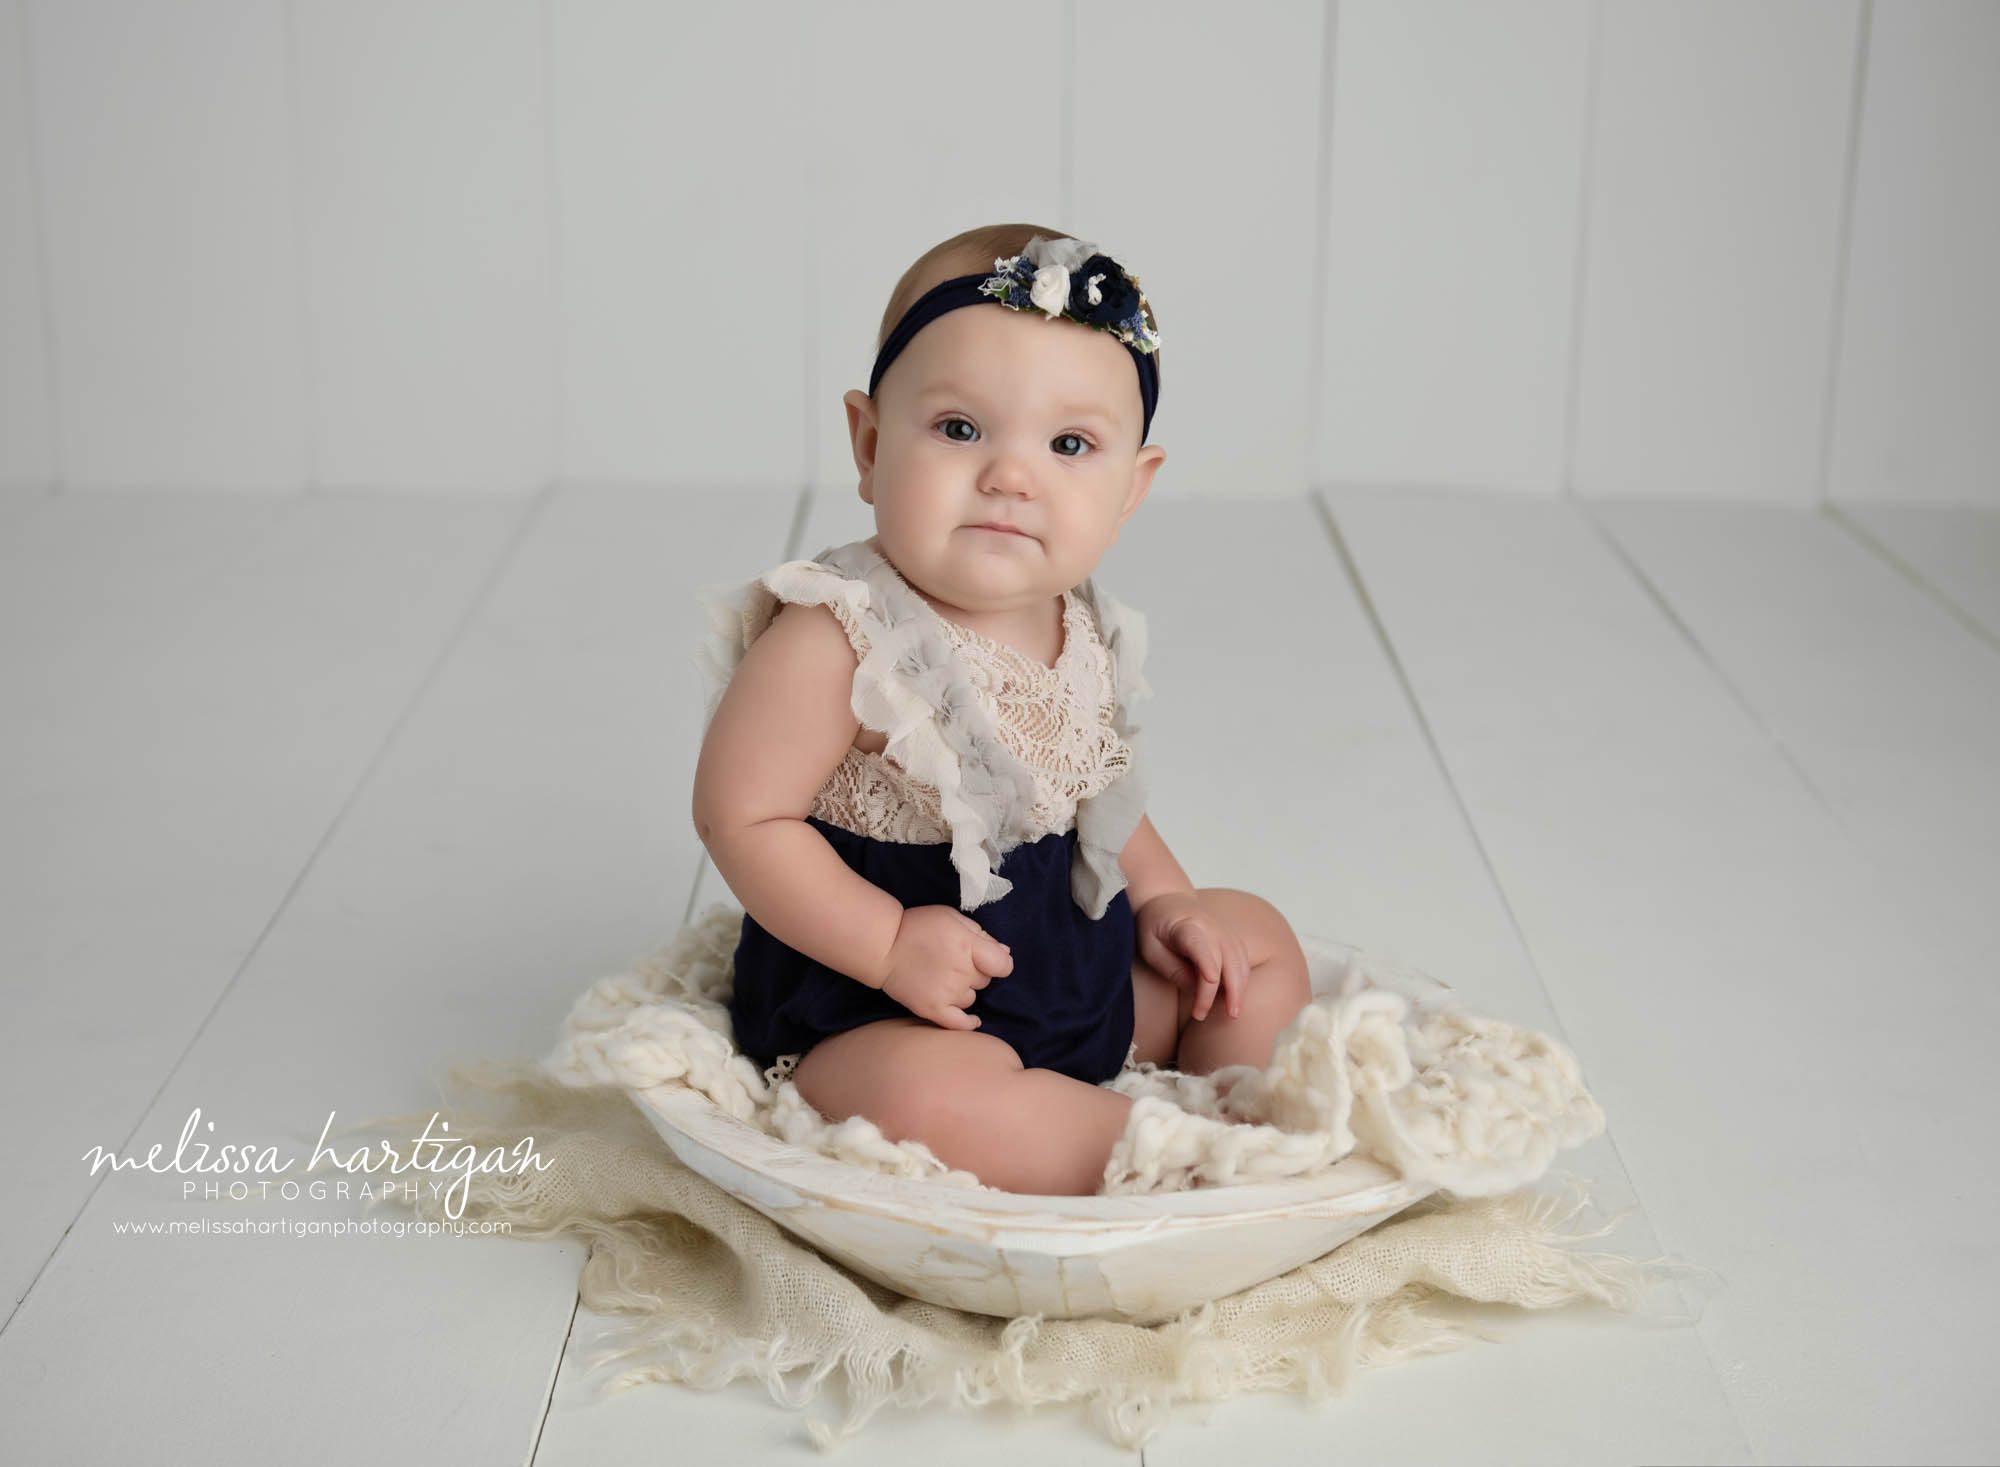 baby girl sitting in cream colored wooden bowl prop baby milestone photography studfio